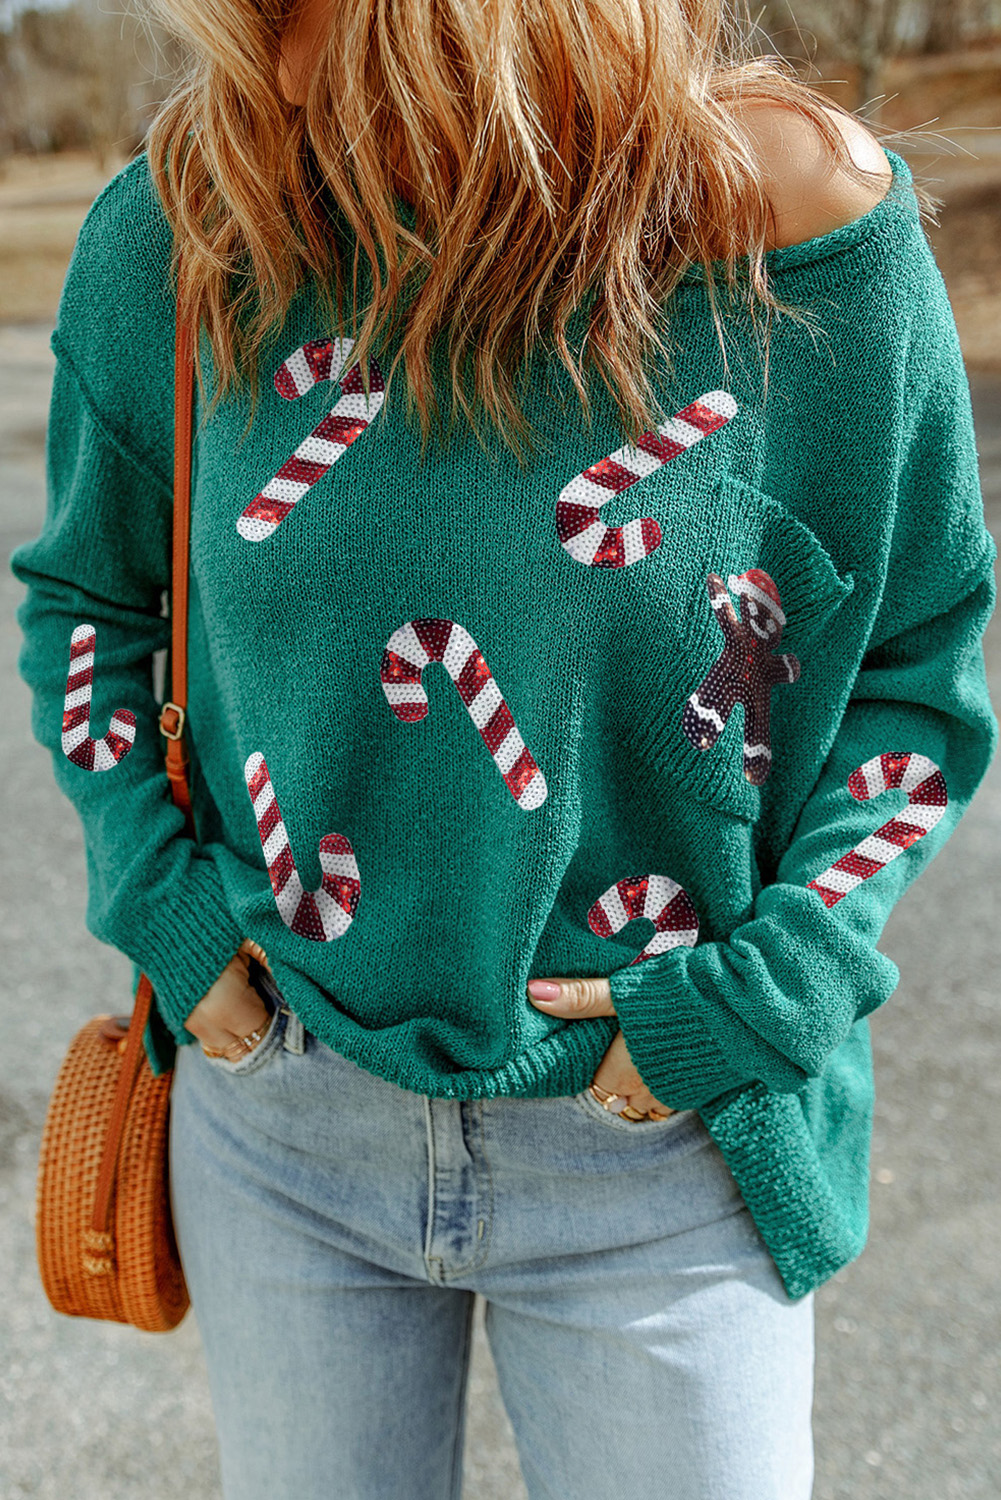 Shewin Wholesale Clothes Stores Green Sequined CANDY Canes Gingerbread Man Graphic Sweater